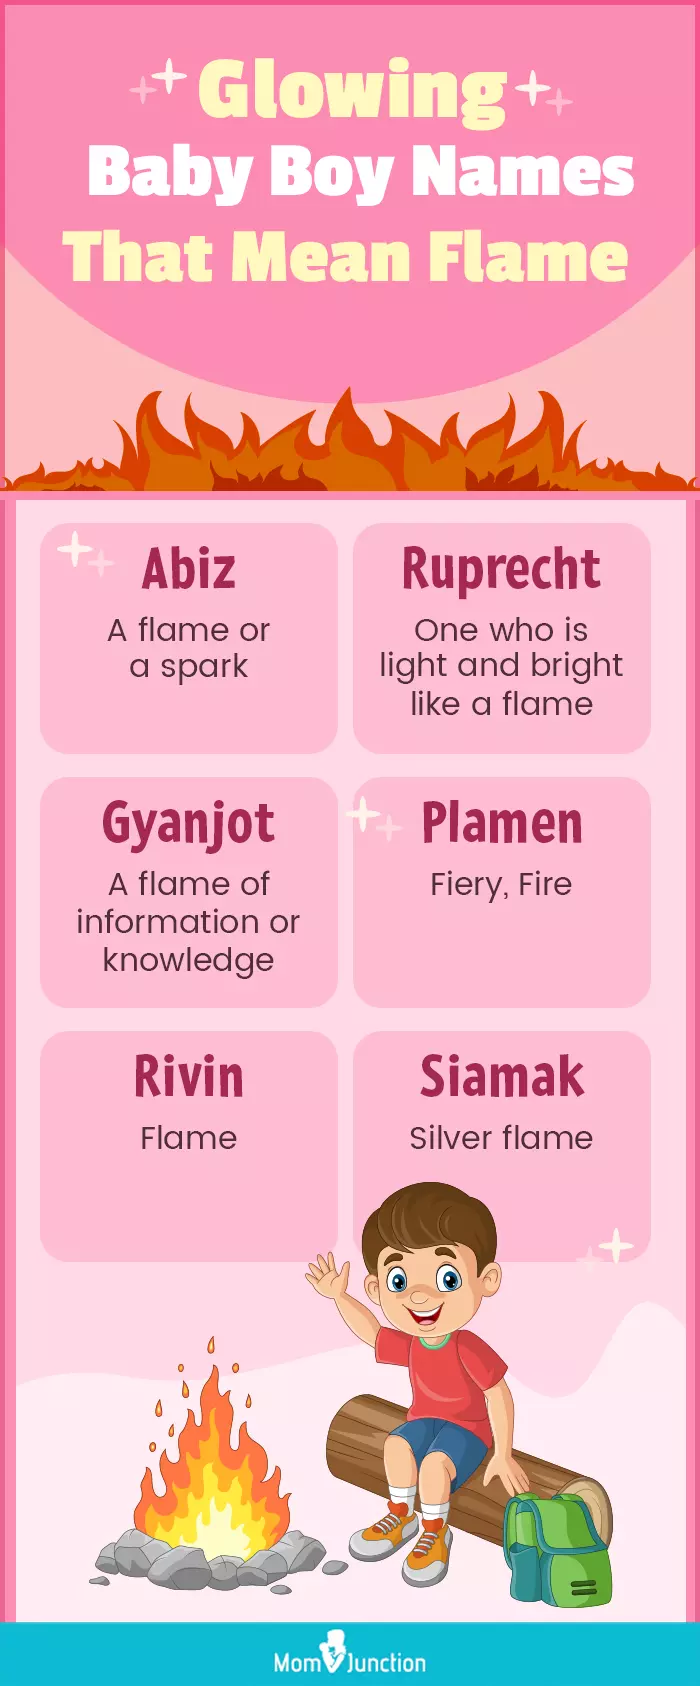 Glowing Baby Boy Names That Mean Flame (infographic)